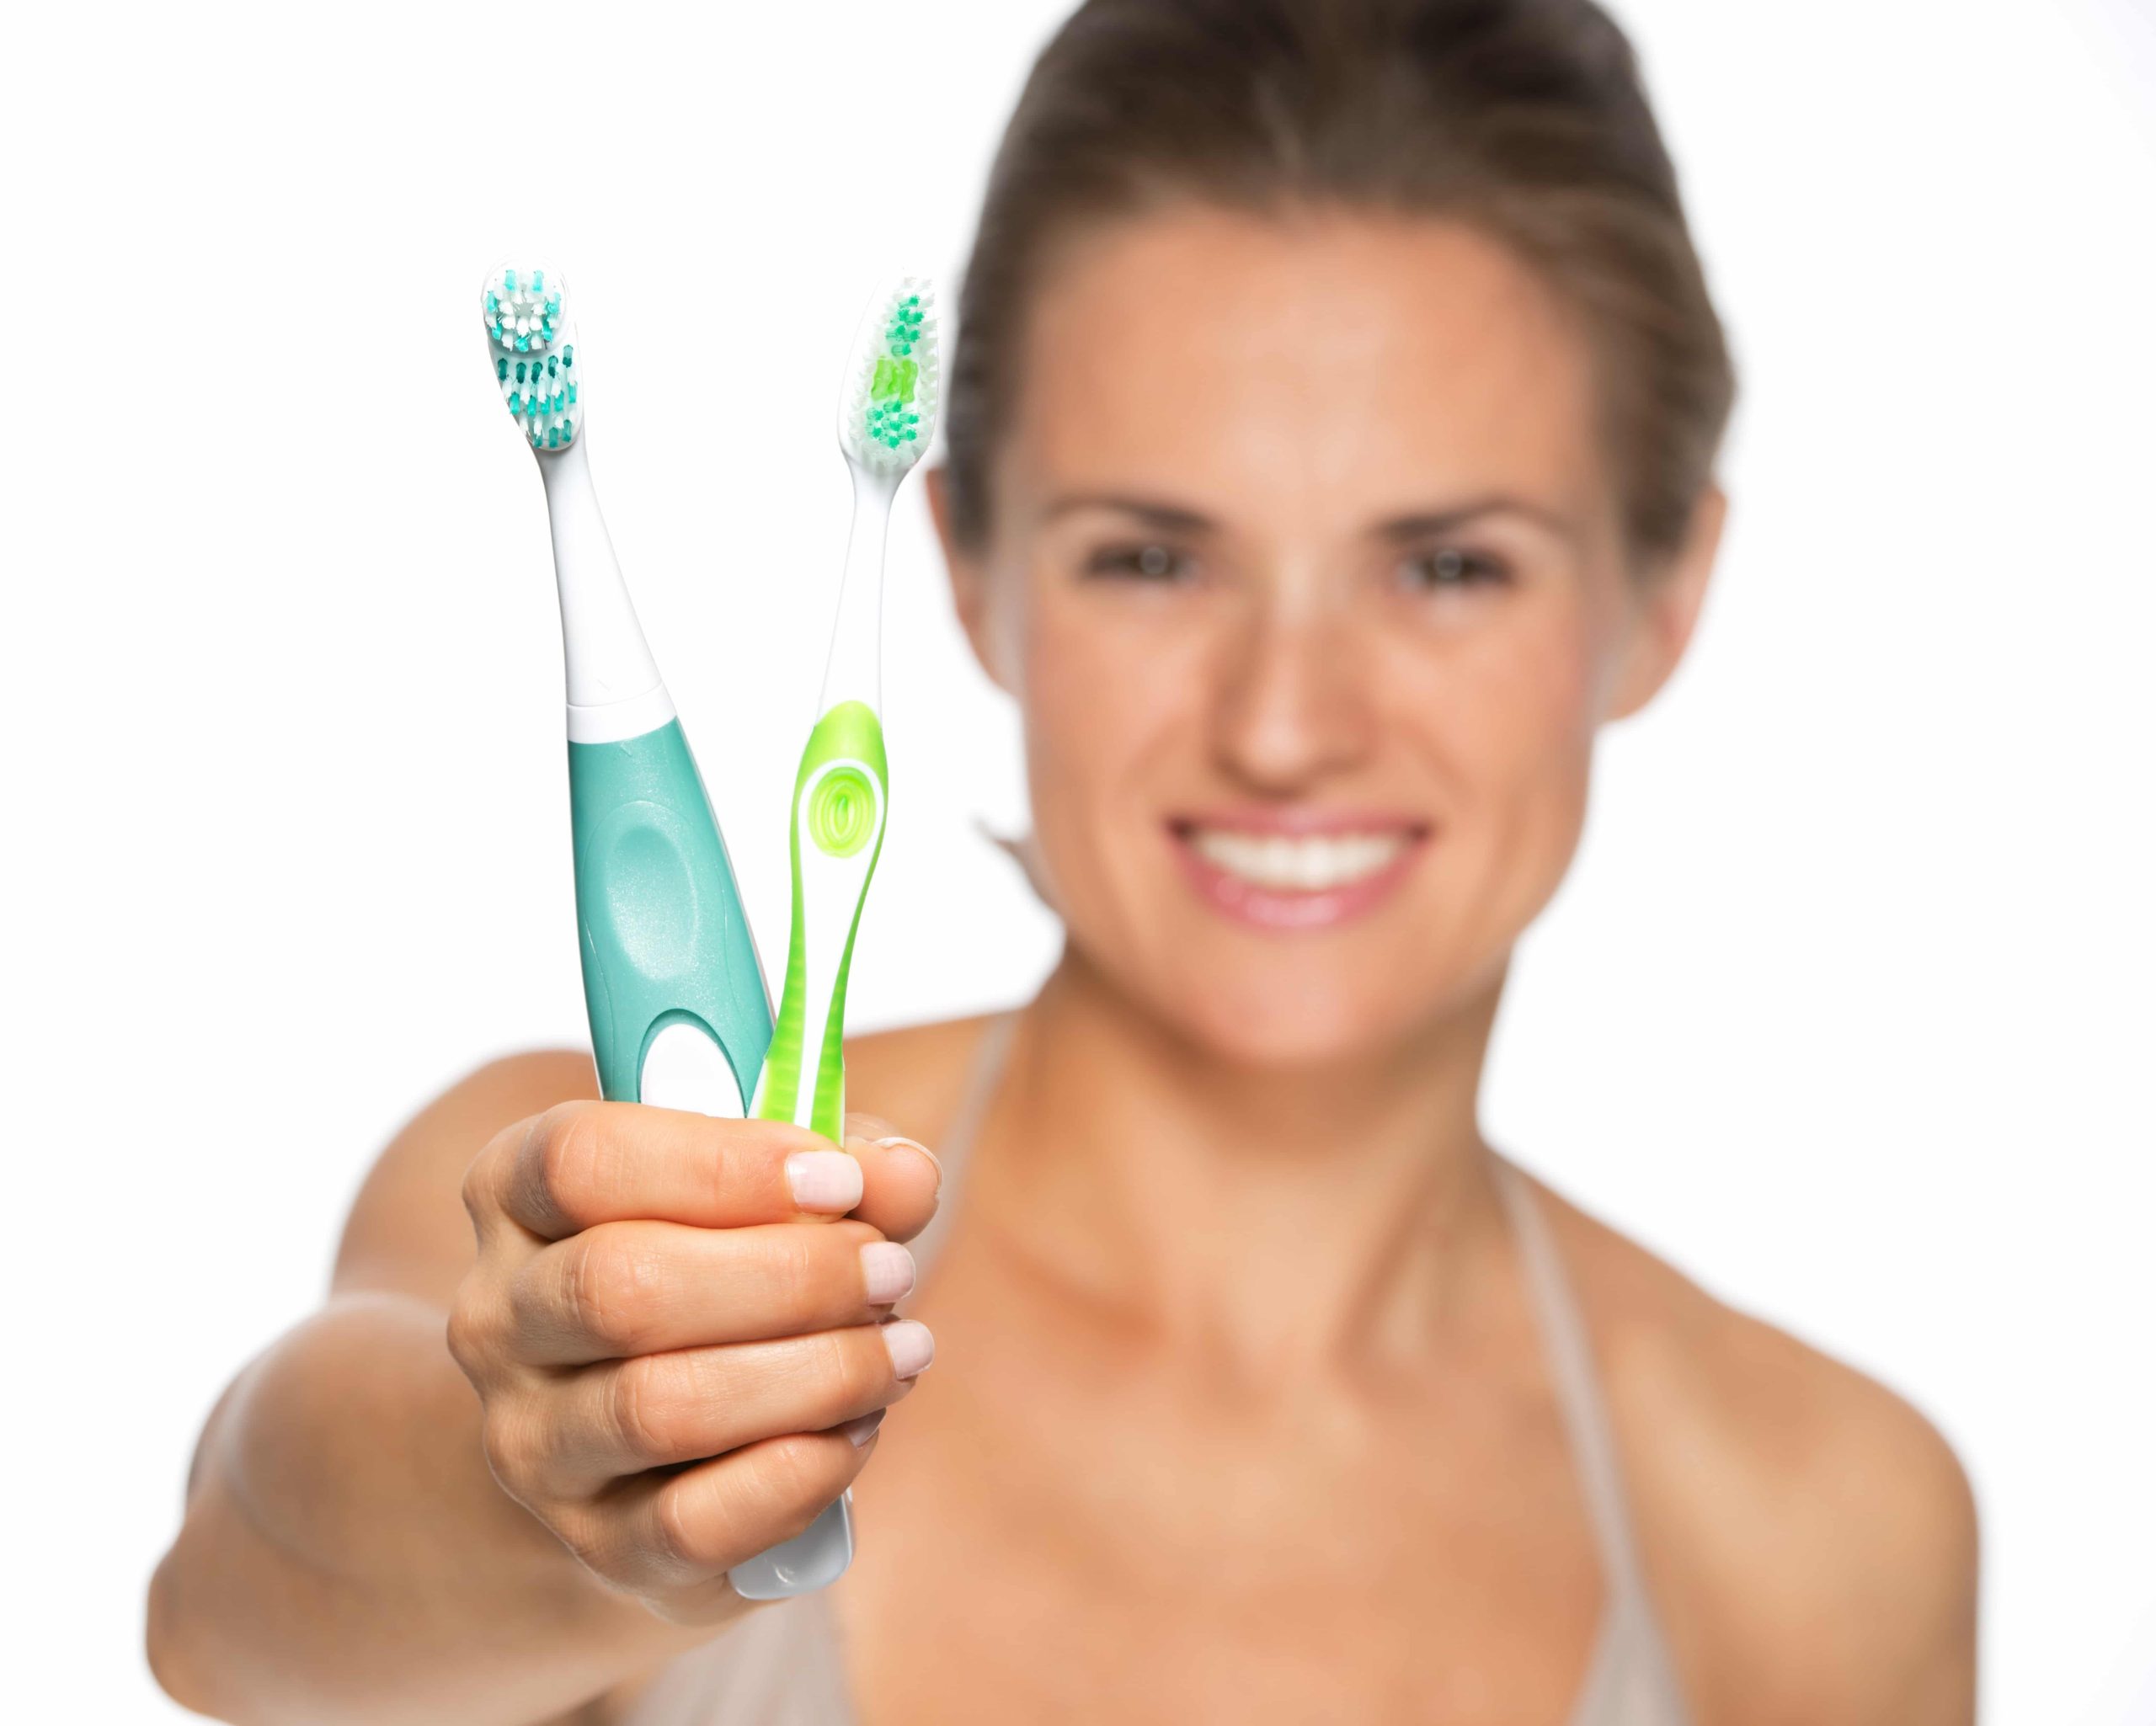 Chosing an electric toothbrush with Dr. Saferin, in bestsmiles Dentist west hartford, CT